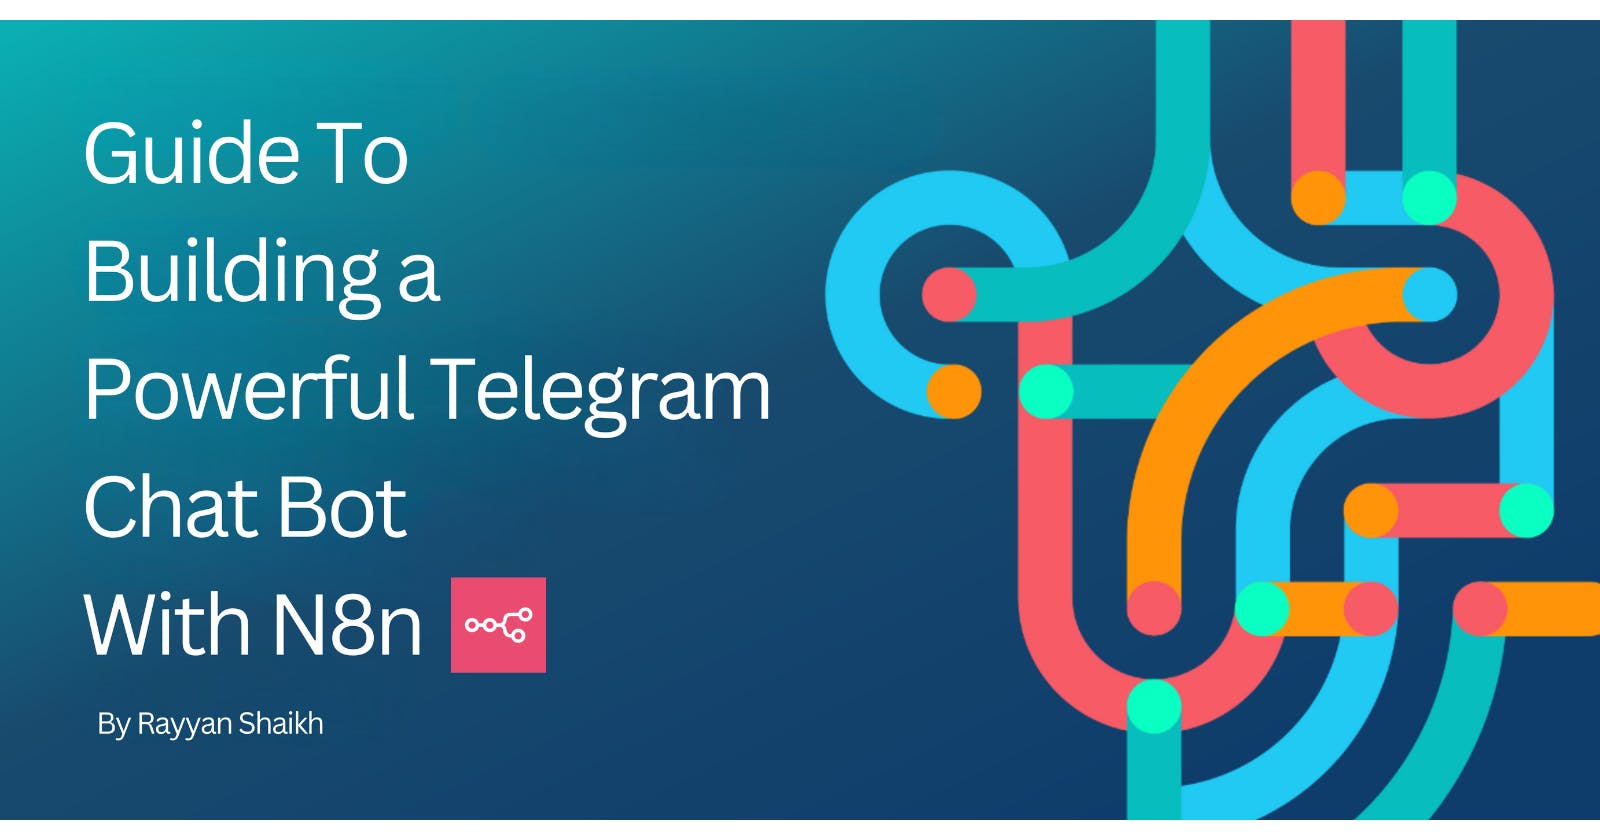 Guide To Building a Powerful Telegram Chat Bot With N8n